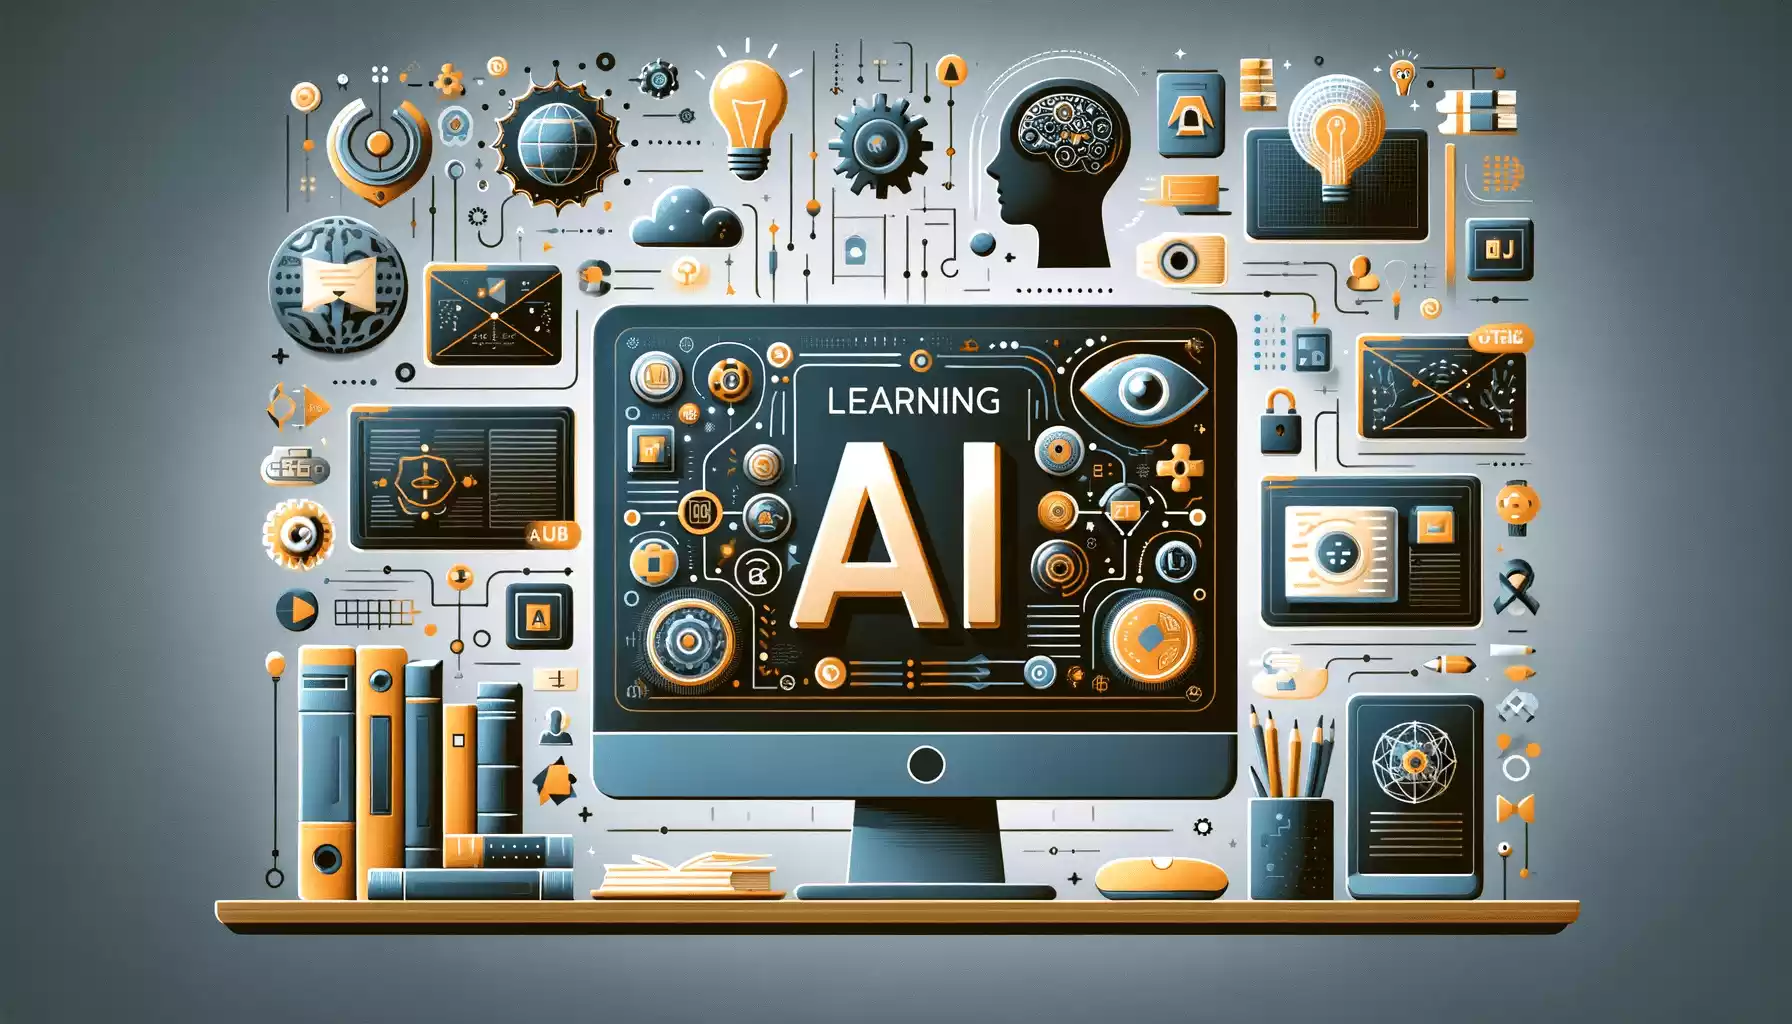 Mastering AI 5 Free Courses and ChatGPT Journey from Novice to Expert